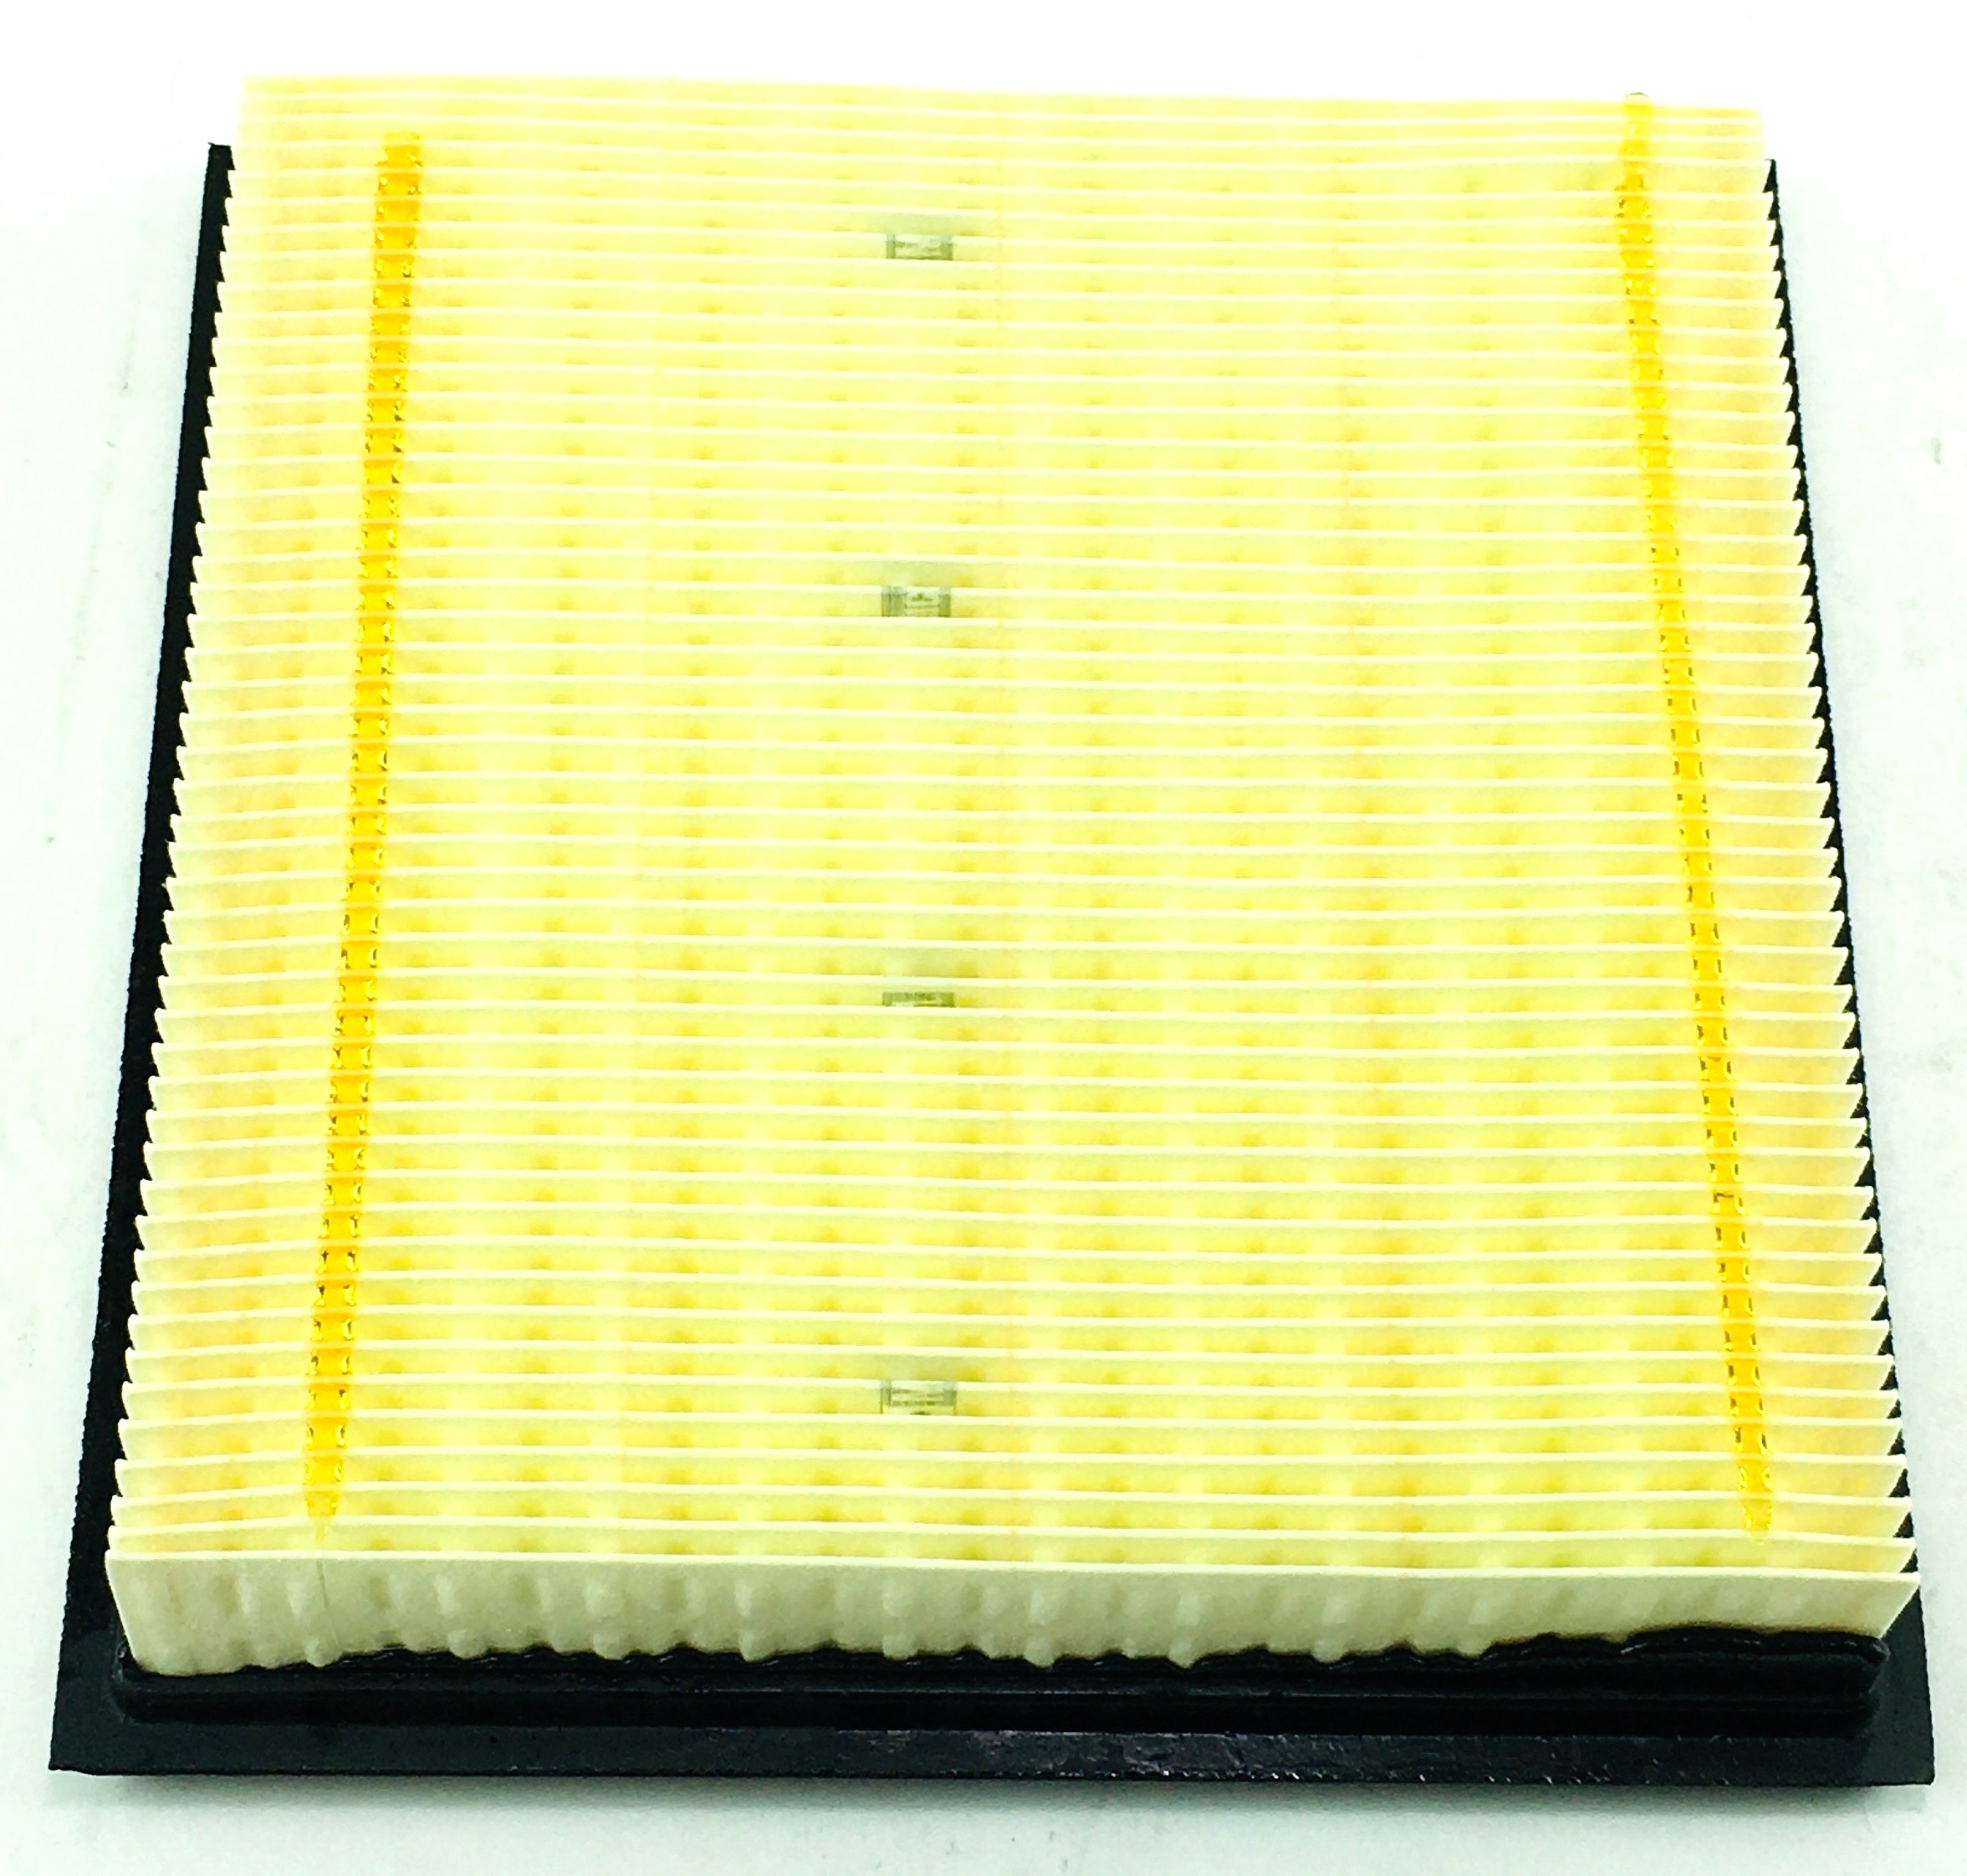 Set of 4 OEM Motorcraft FA1883 Ford 7C3Z9601A Genuine Air Filter Free Shipping - image 4